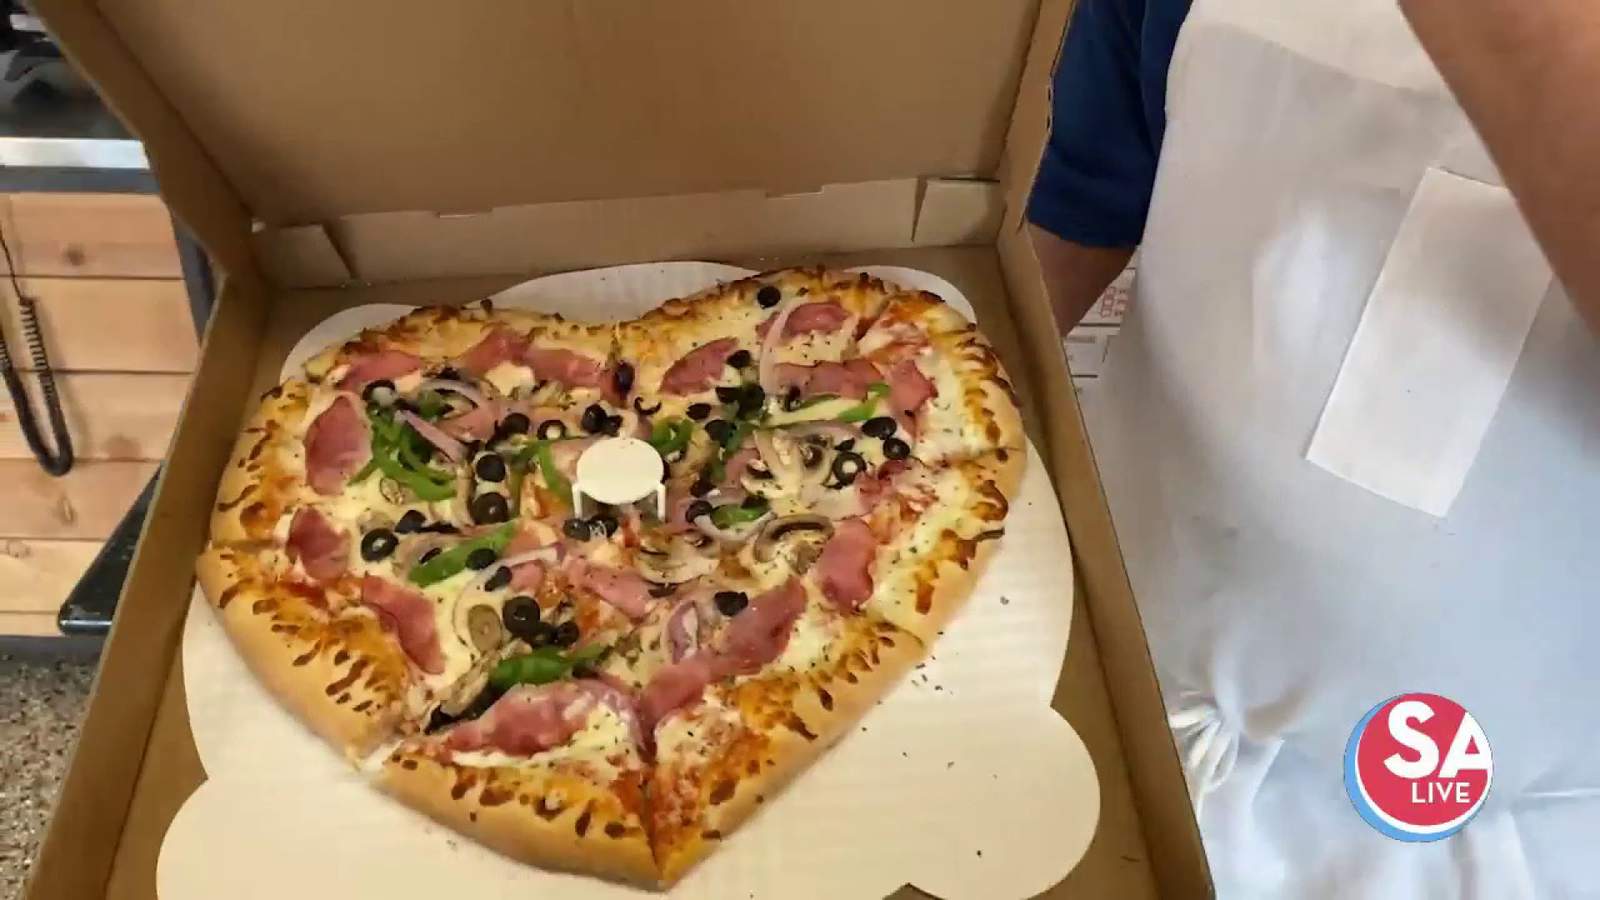 Send a ‘pizza’ your heart